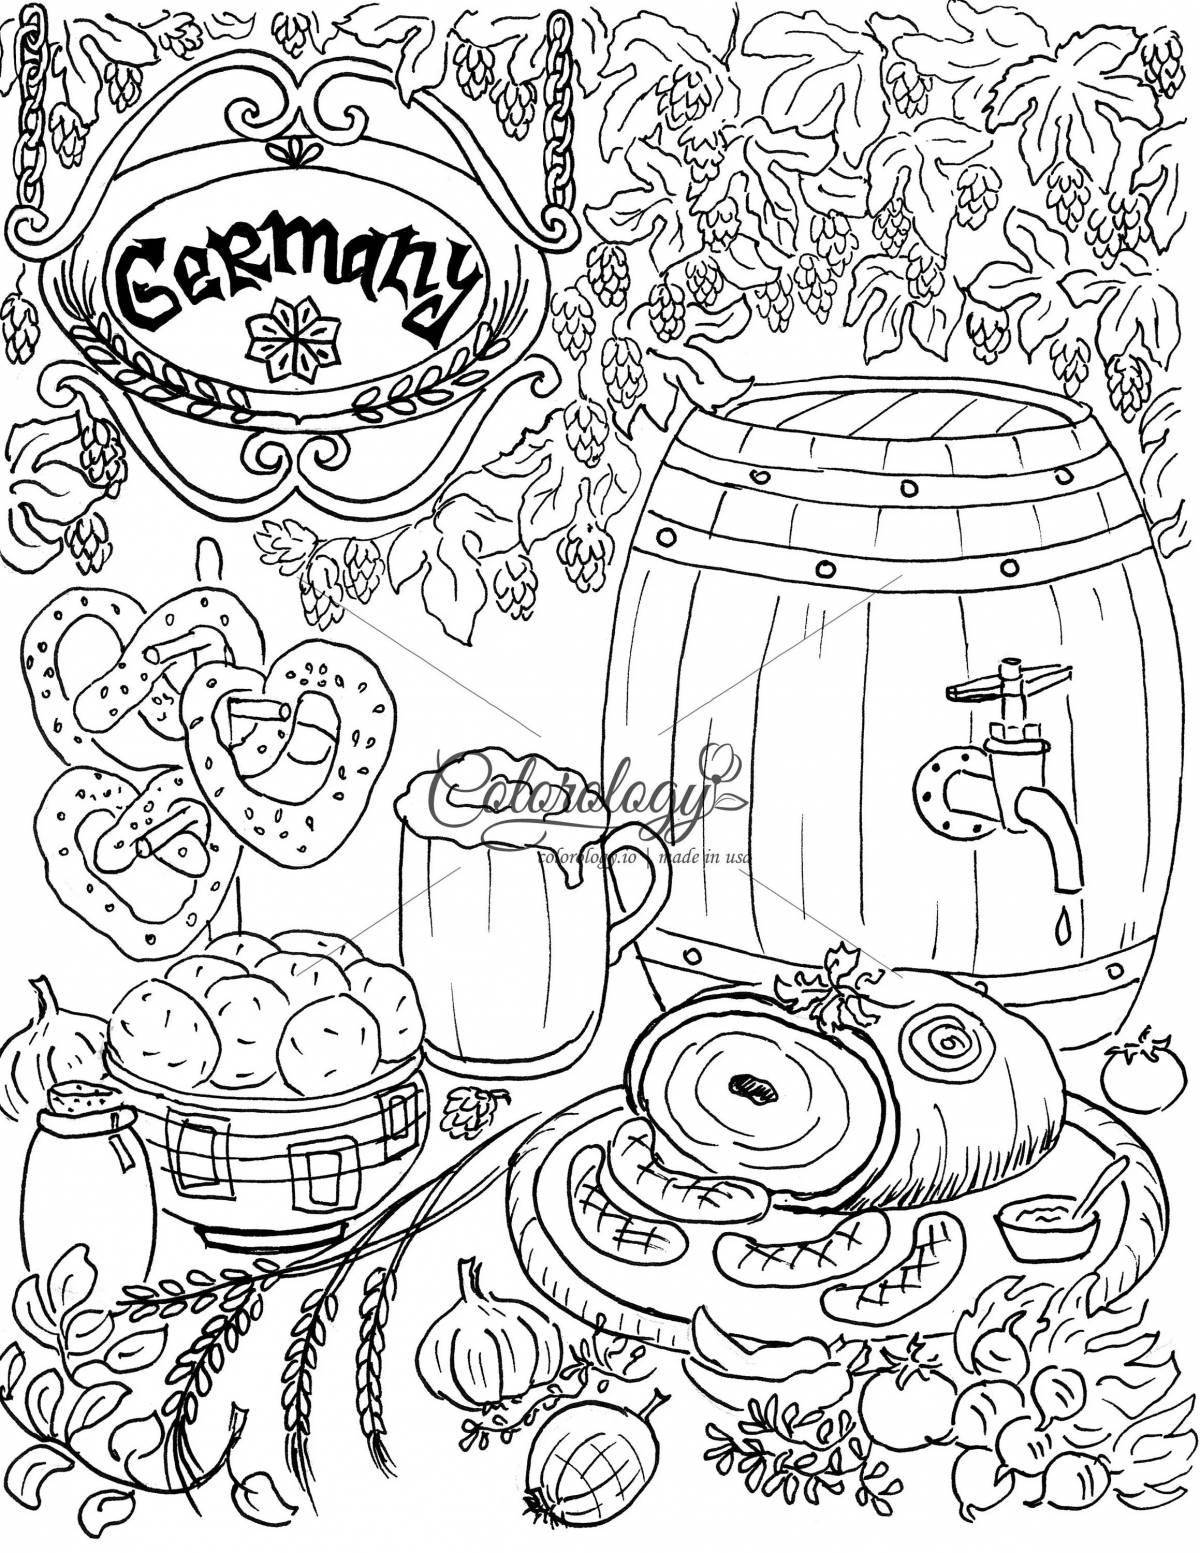 Coloring page traditional belarusian cuisine